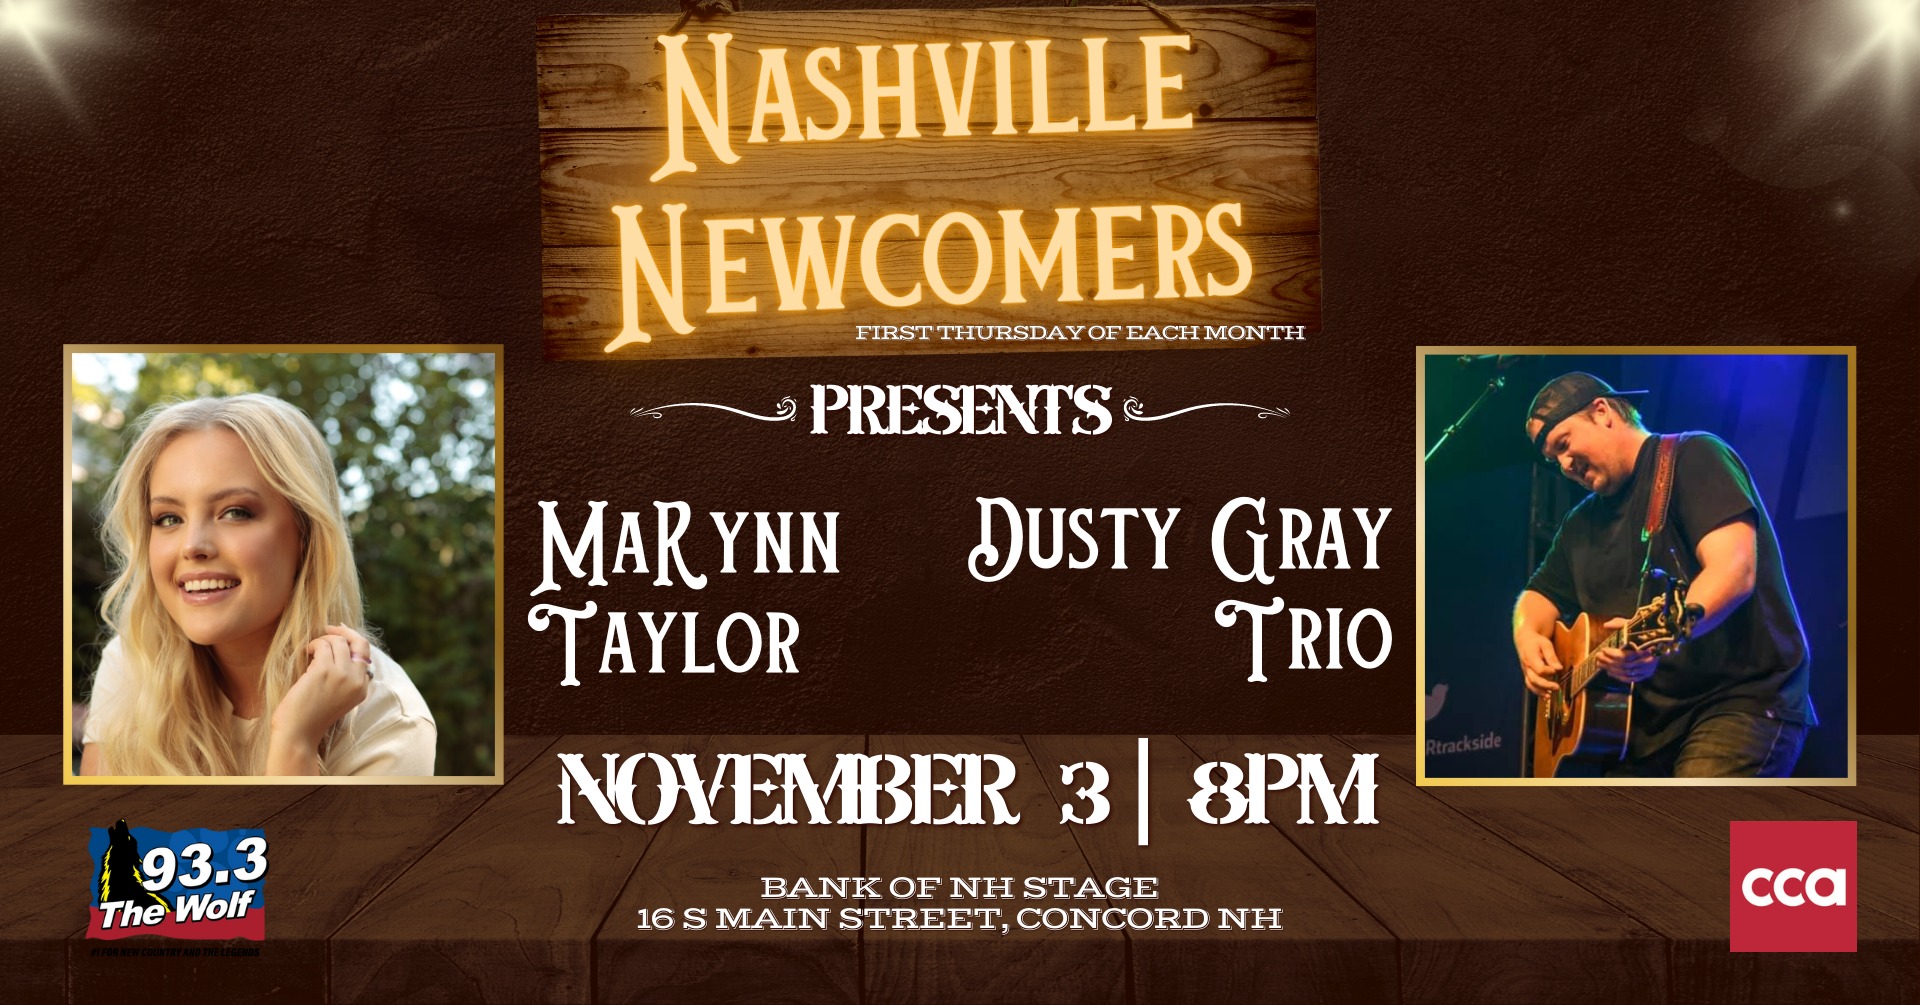 Nashville Newcomers Concert Series: MaRynn Taylor and Dustin Gray Trio